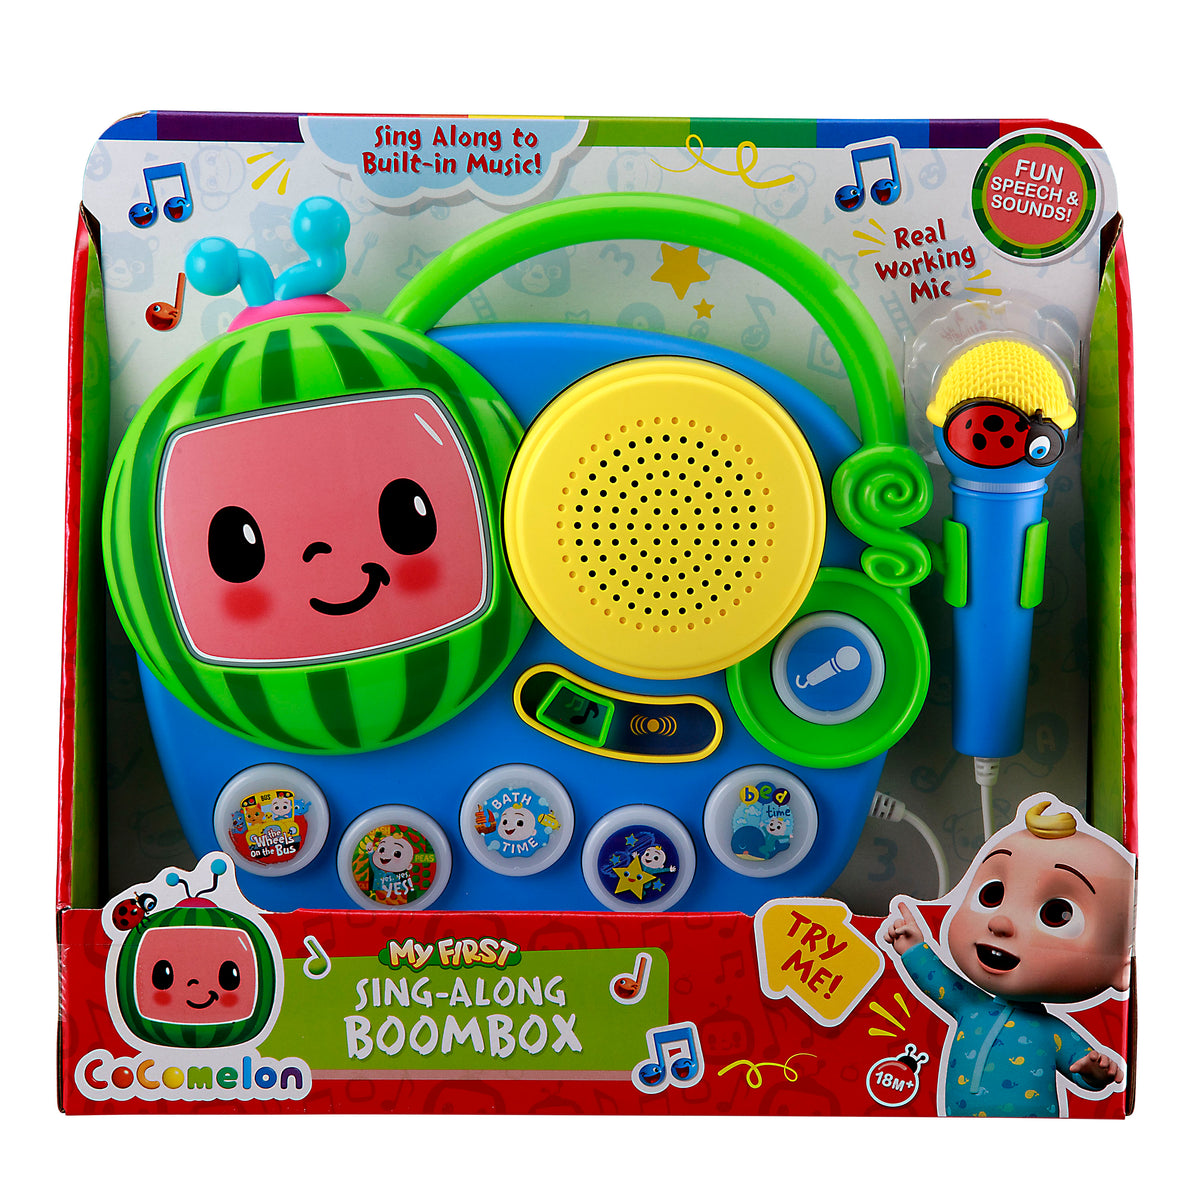 KIDdesigns CoCoMelon My First Sing Along Boombox for Kids - Multi-color